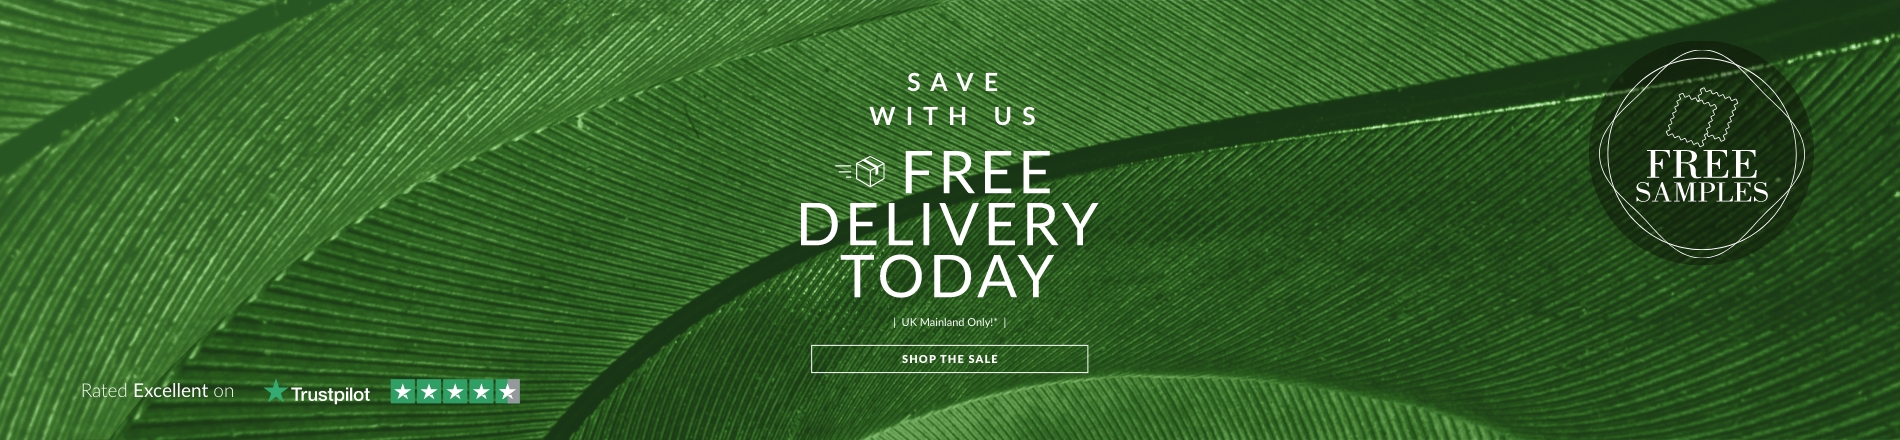 IGD Free Delivery May 22